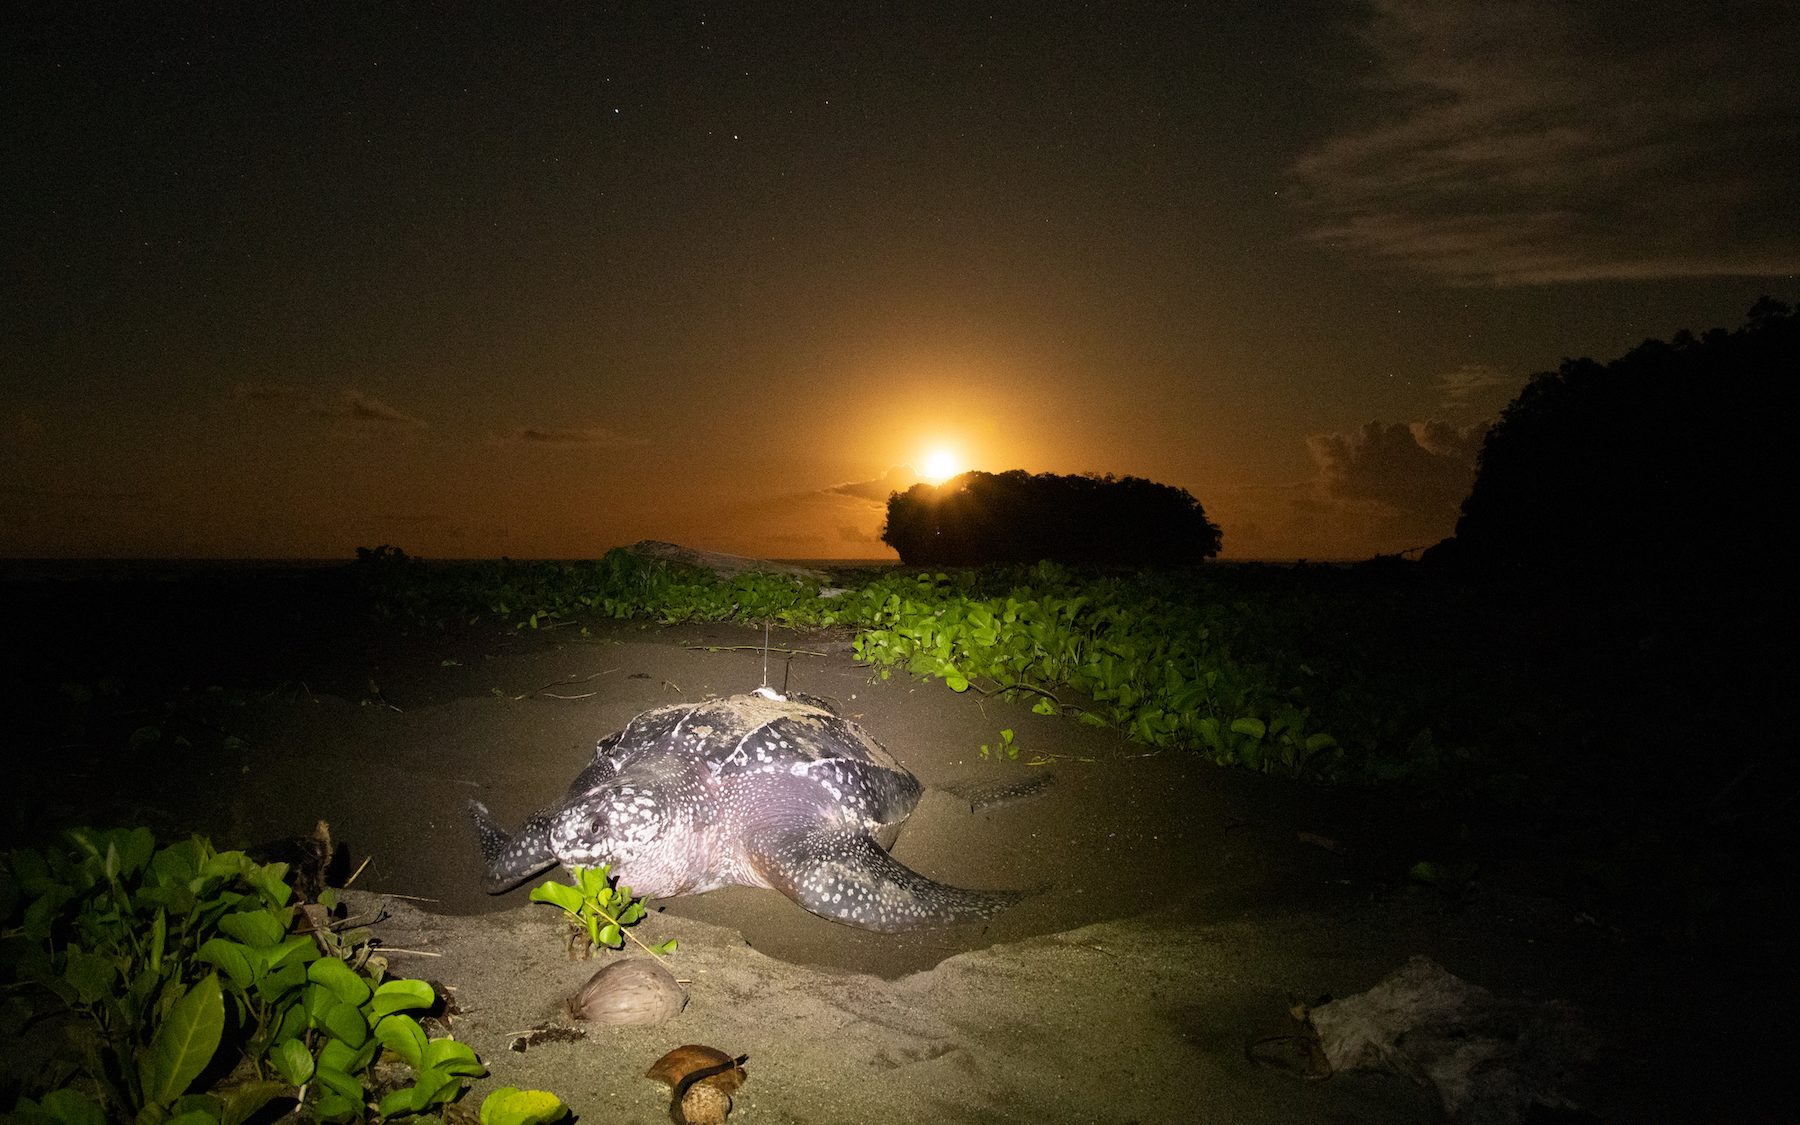 a sea turtle on the beach with the moon rising in the background